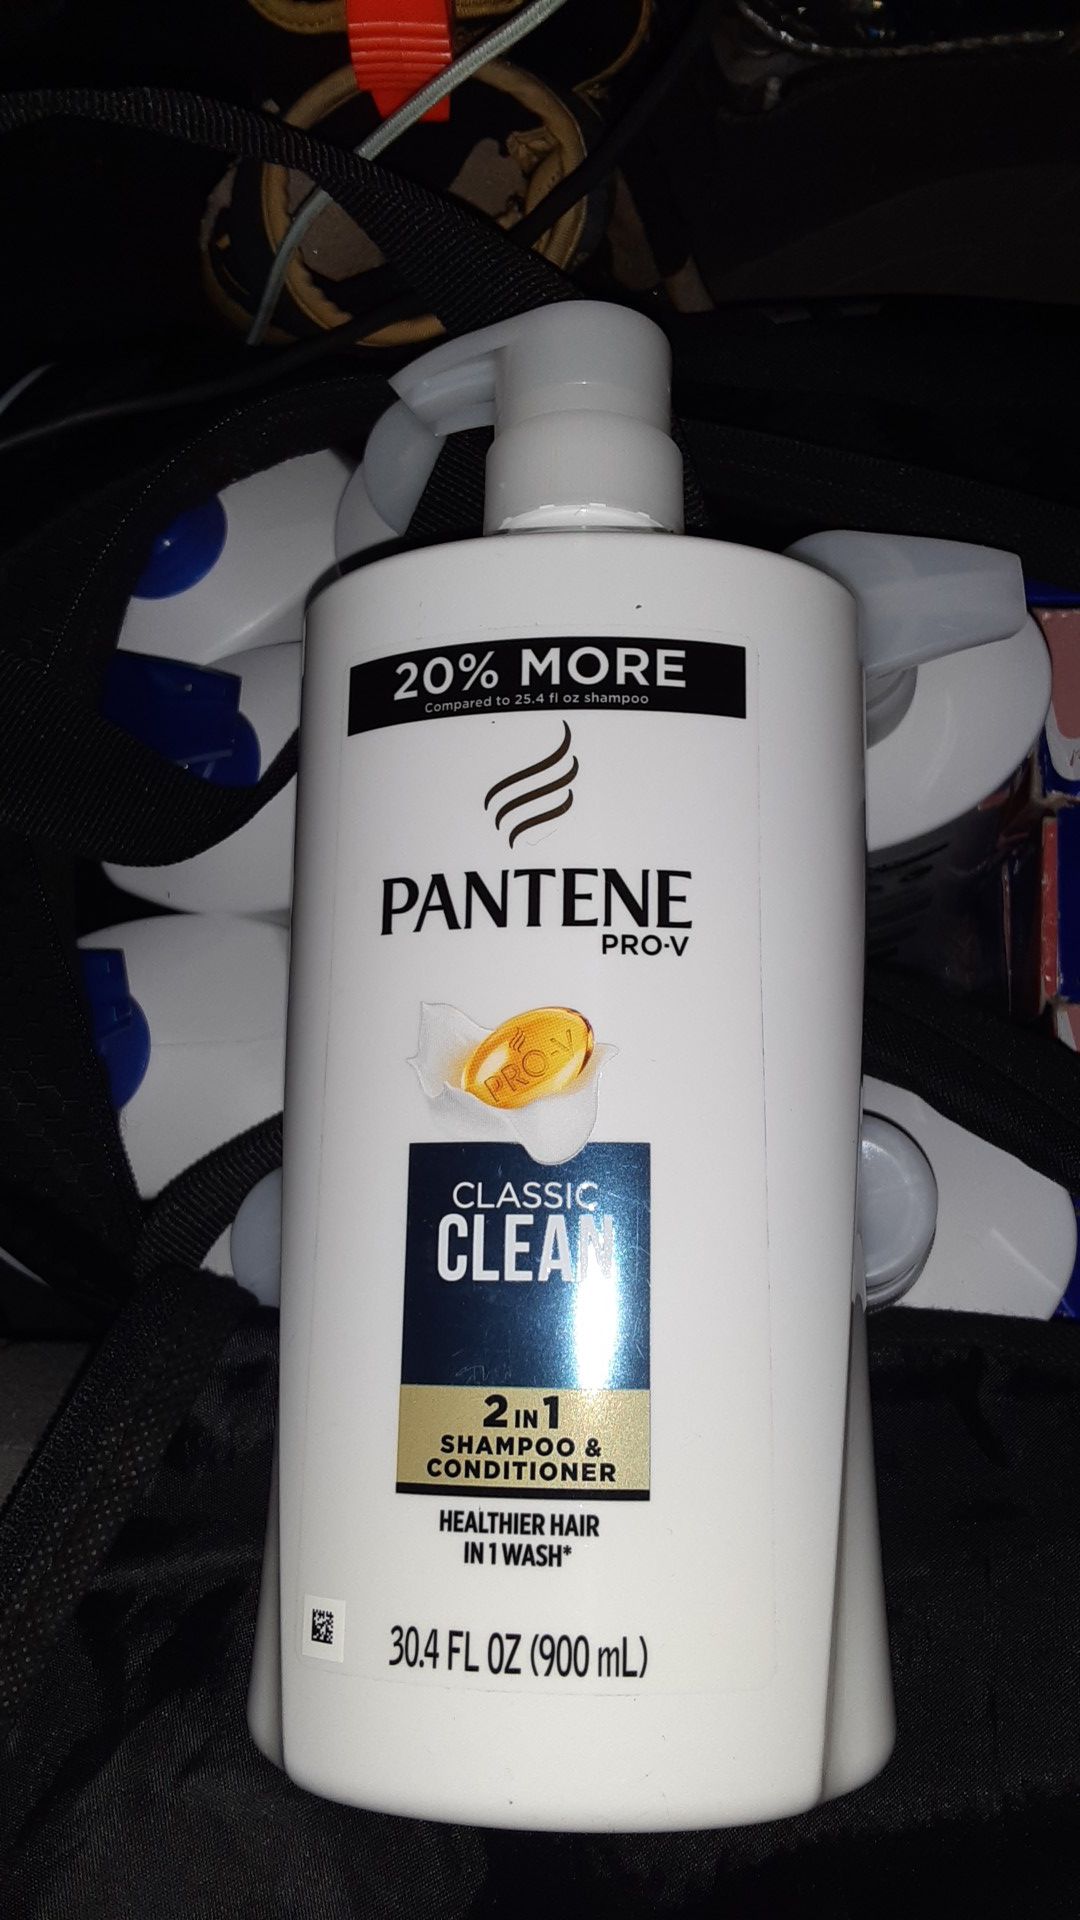 Pantene 2 in 1, Head and Shoulders 2 in 1, and Reynolds Wrap